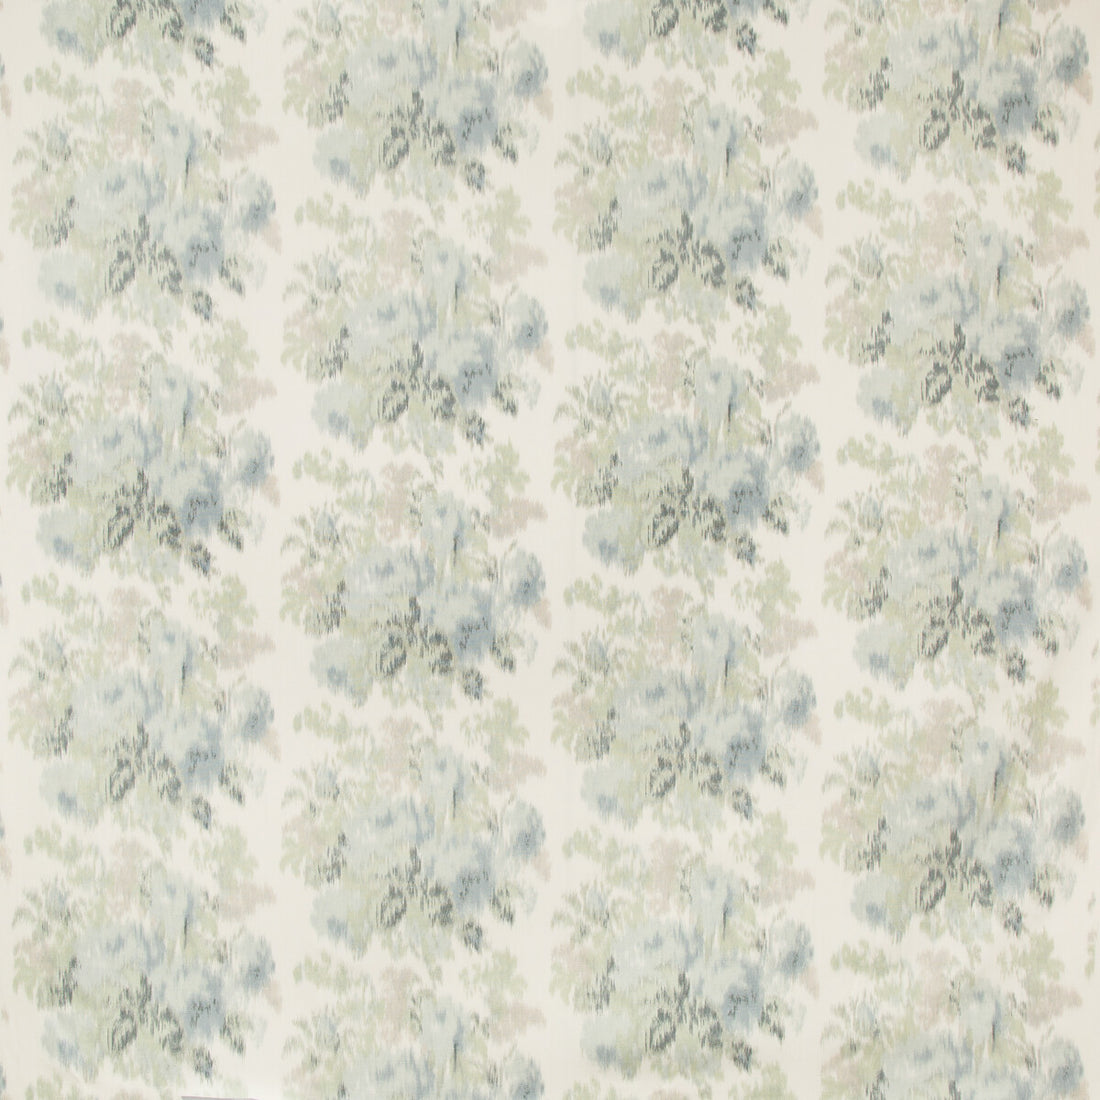 Alderley Print fabric in mineral color - pattern 2019108.123.0 - by Lee Jofa in the Manor House collection